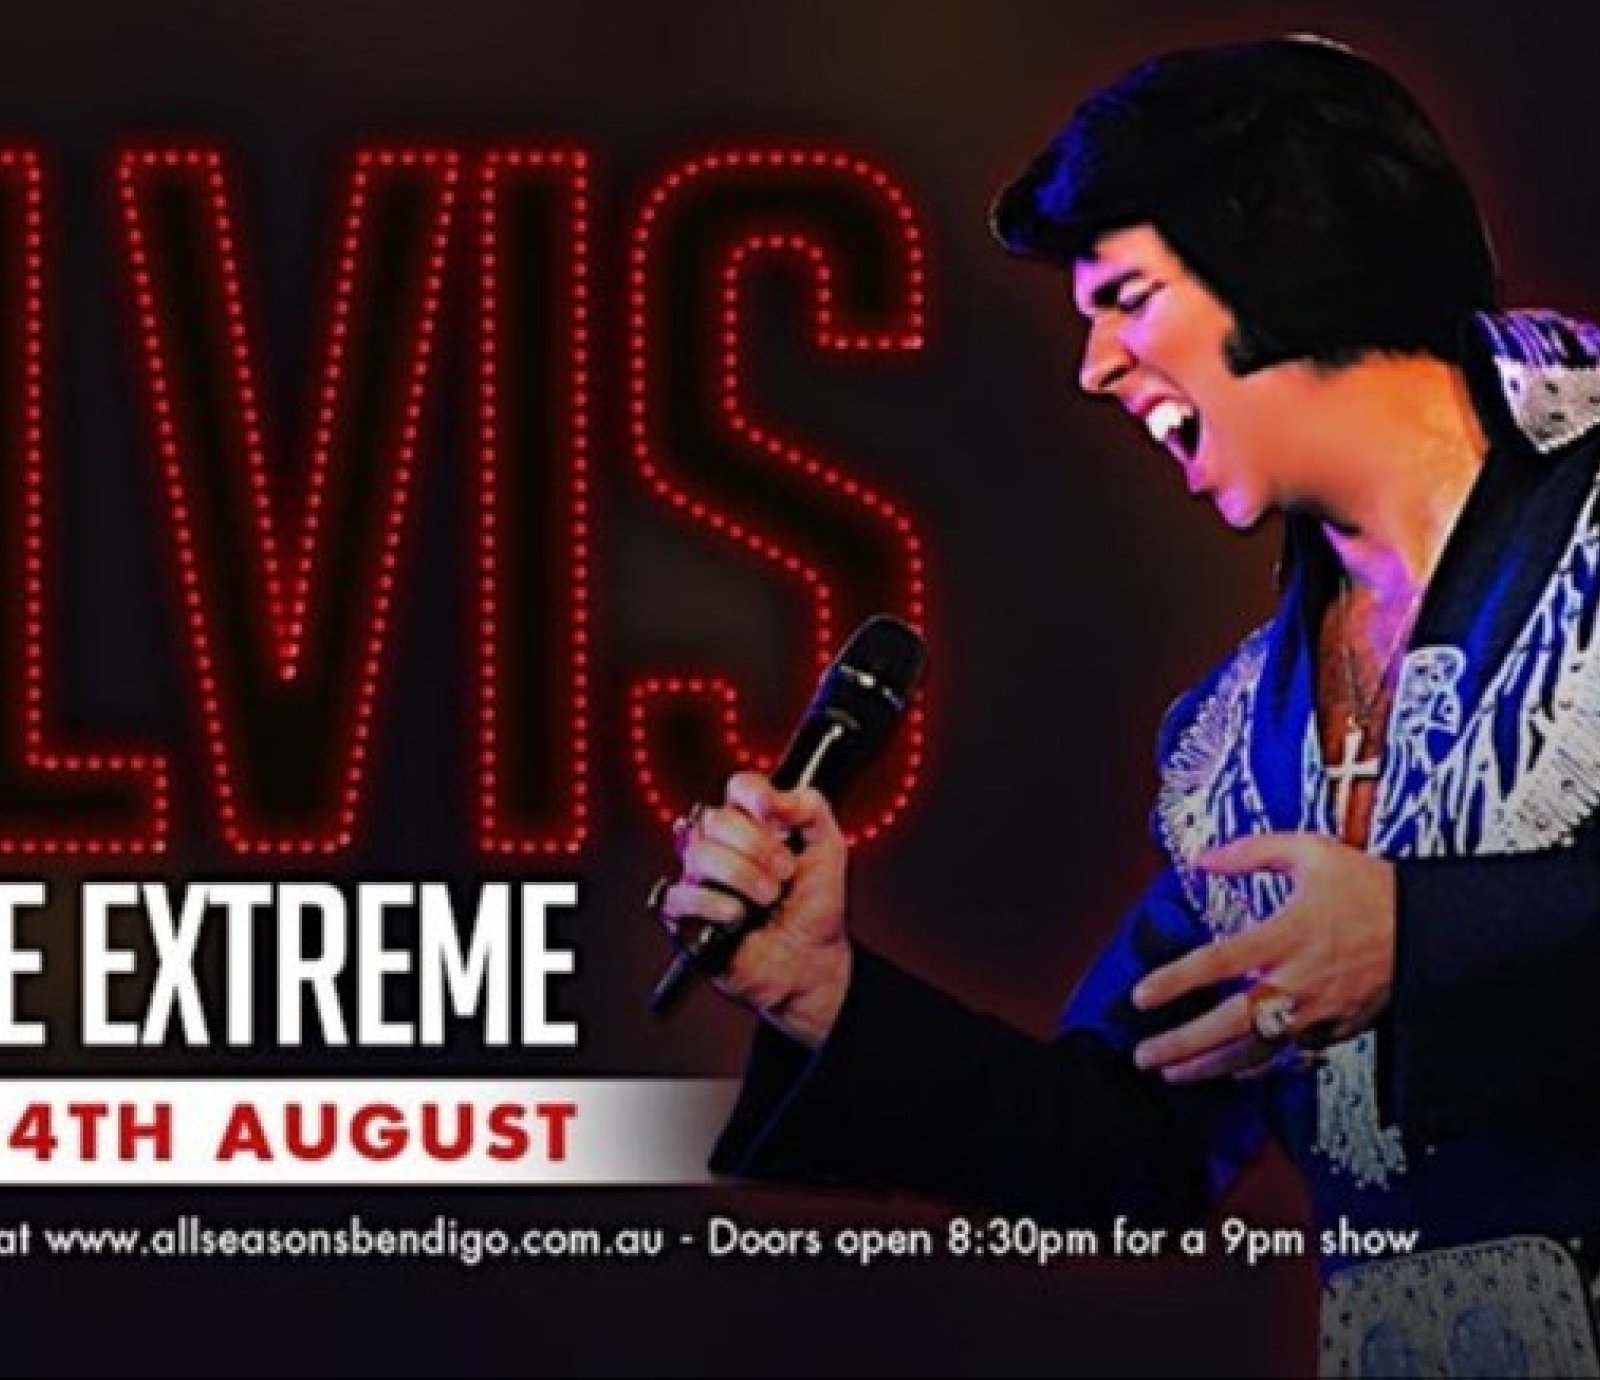 Elvis to the Extreme Tribute Show